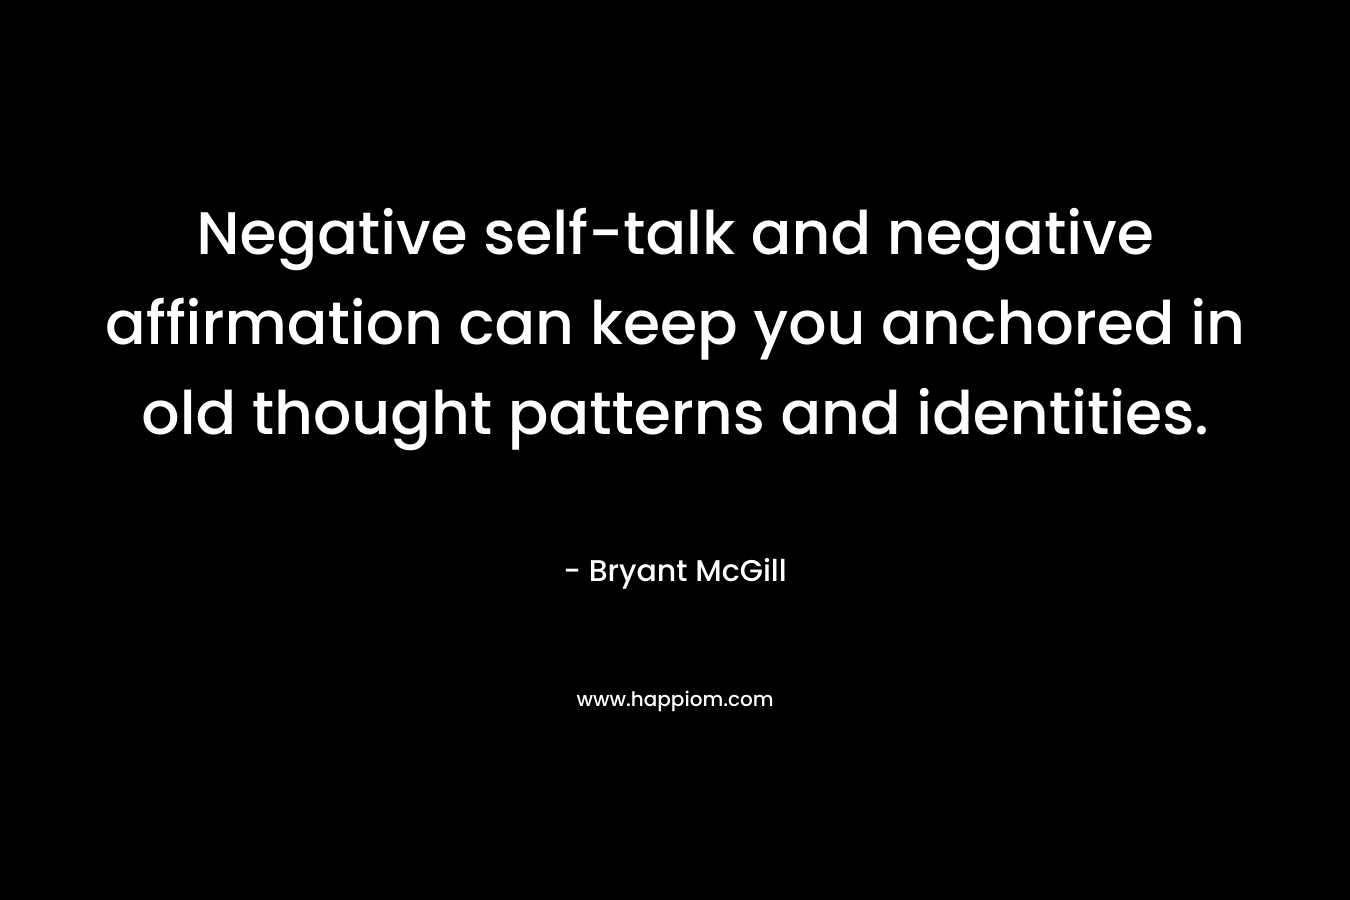 Negative self-talk and negative affirmation can keep you anchored in old thought patterns and identities.